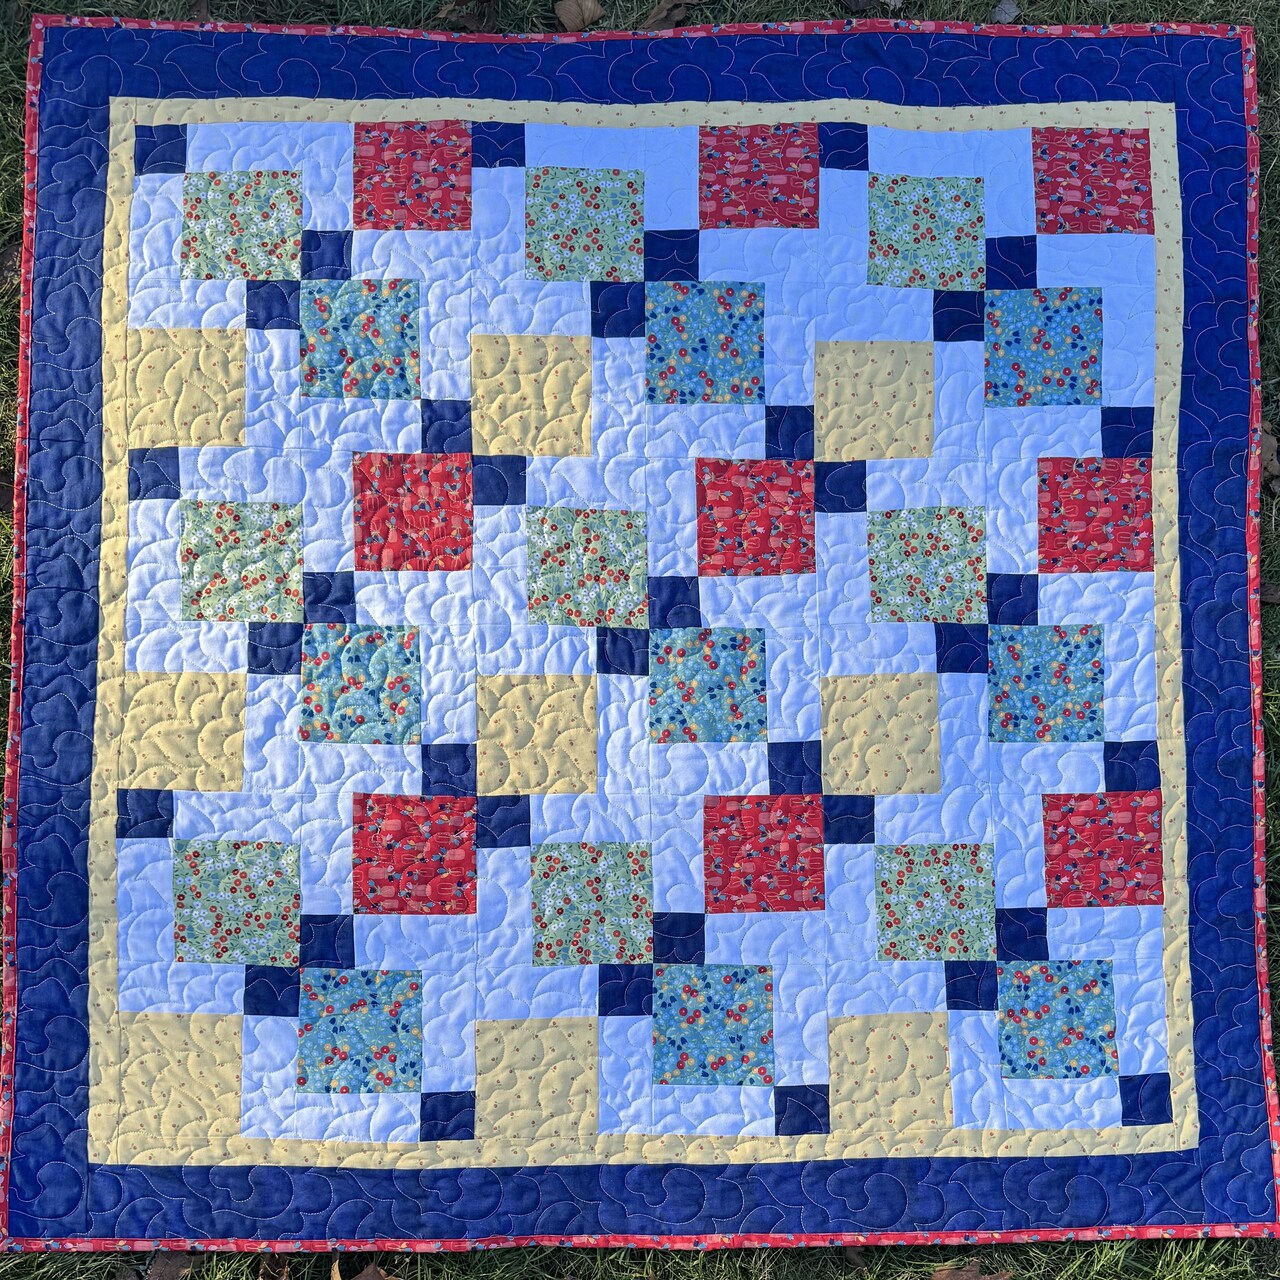 SINGER® PROJECTS Tossed 9-Patch Beginner Piecing and Quilting: Part 2 of 3